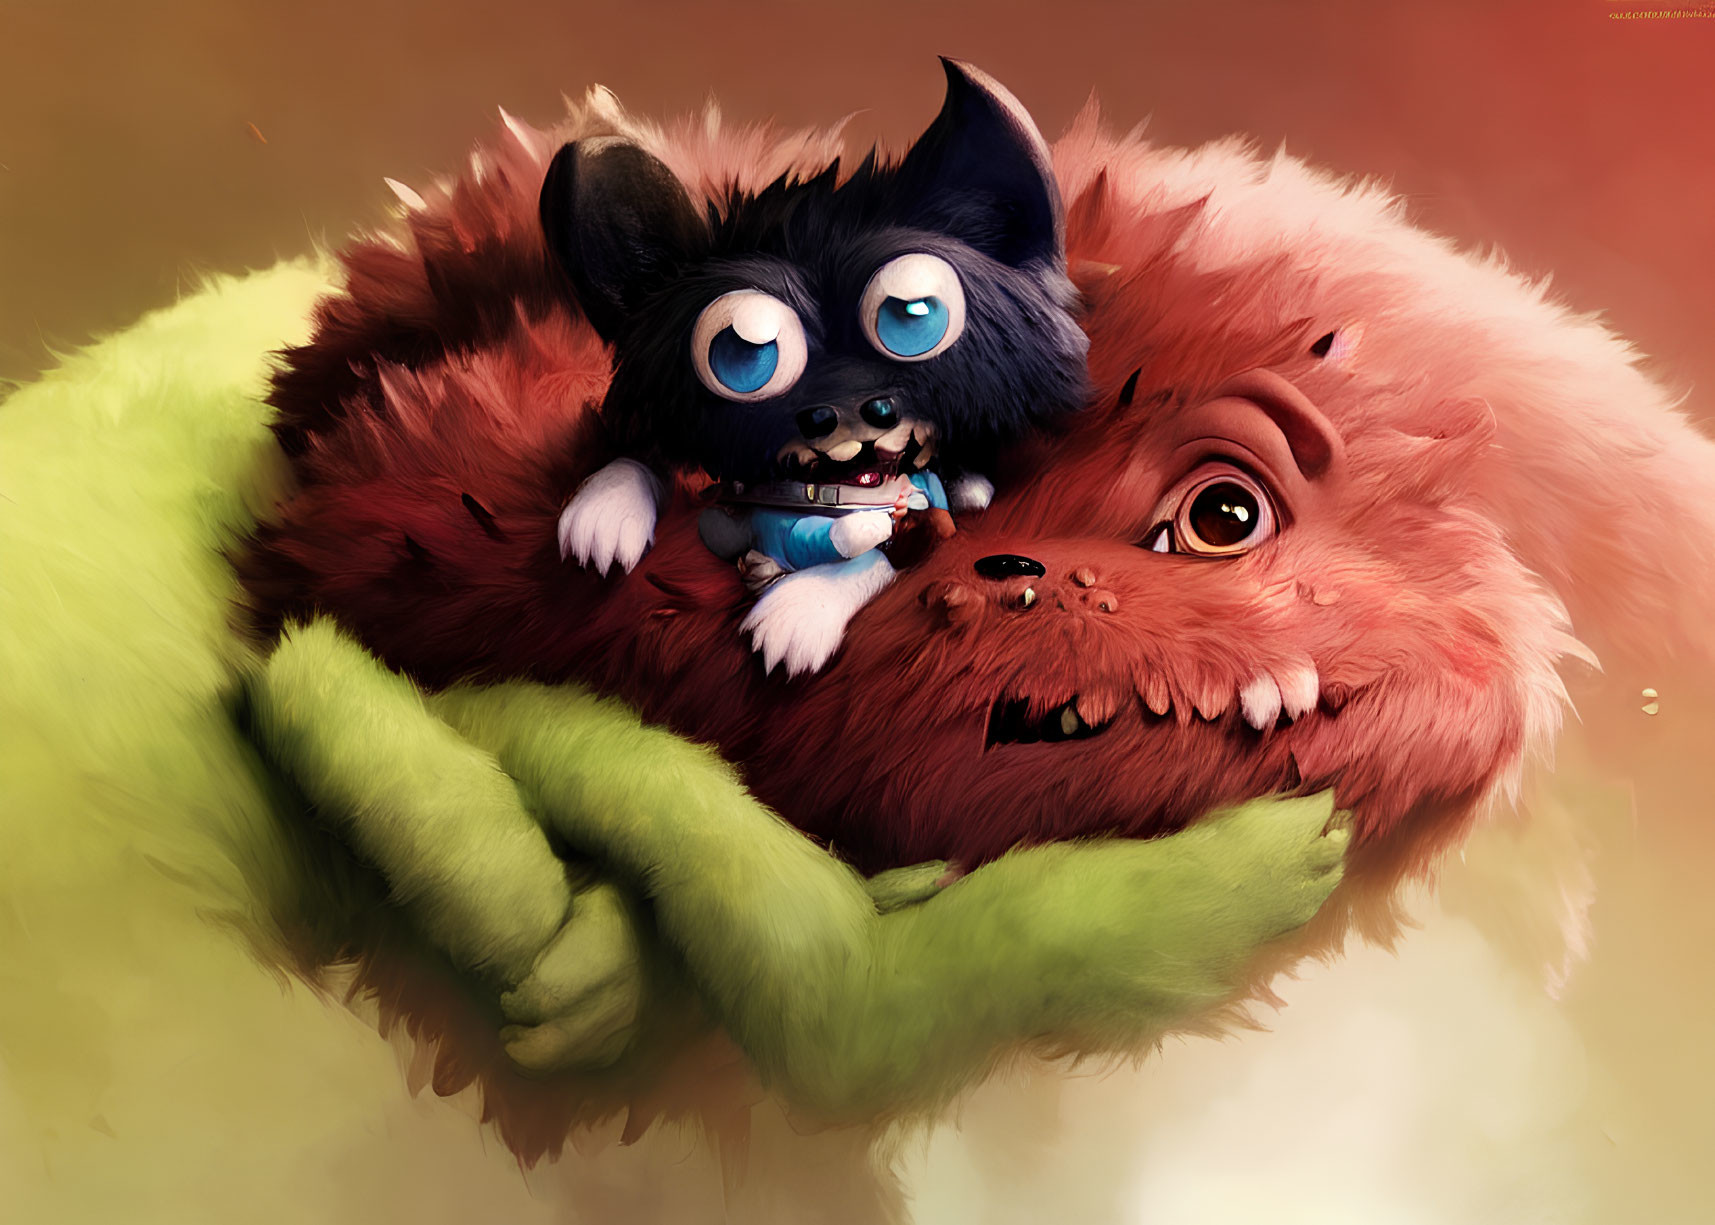 Colorful creatures hugging: blue with big eyes and sharp teeth, red and furry with a surprised